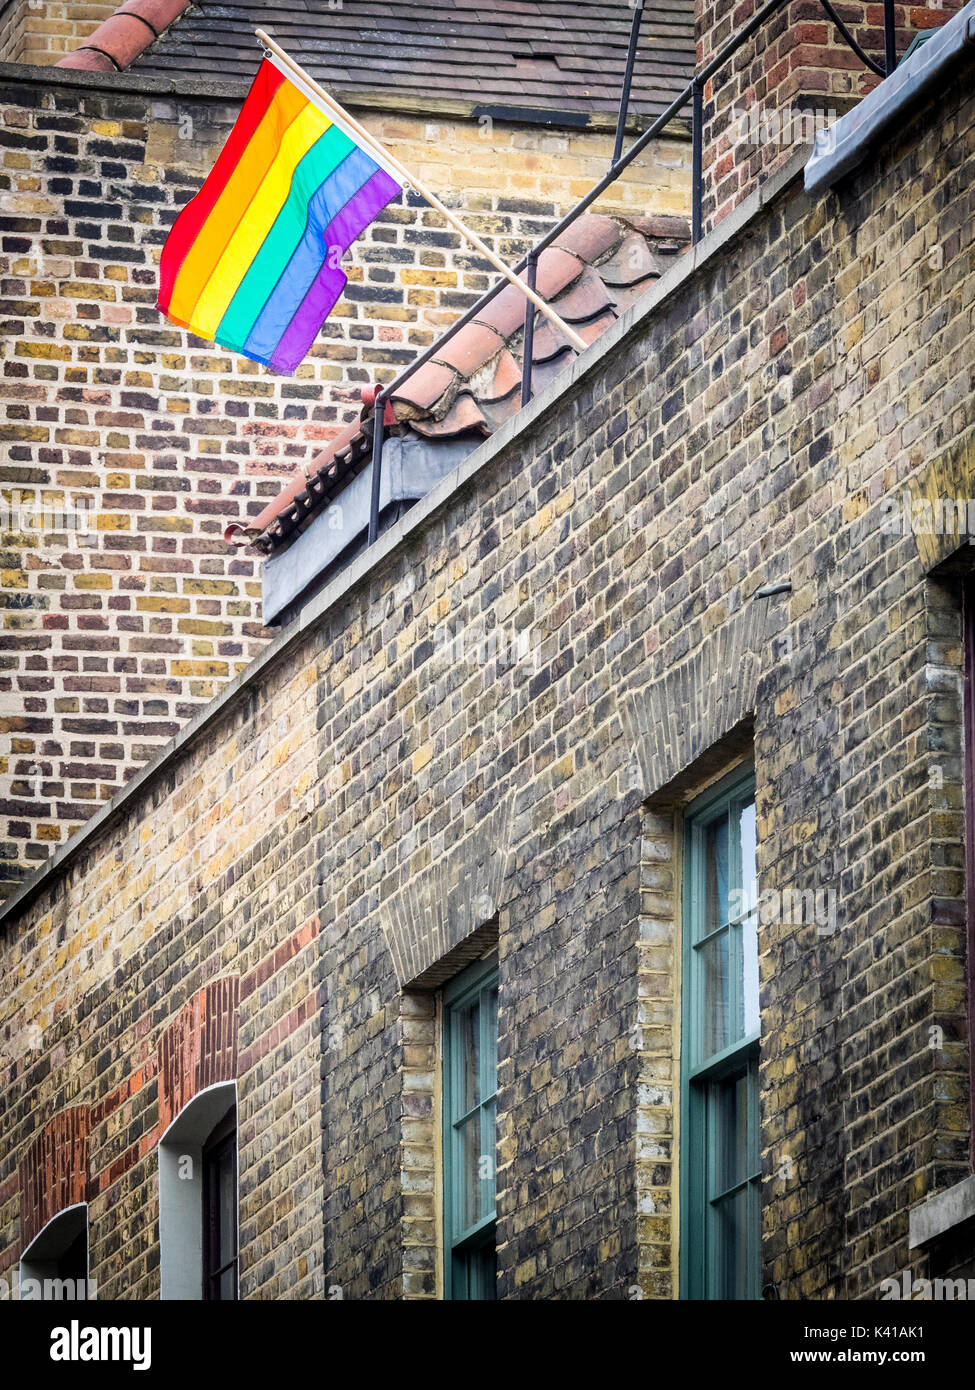 LGBT rainbow flag flies from a building in Spitalfields in London's East End. Stock Photo